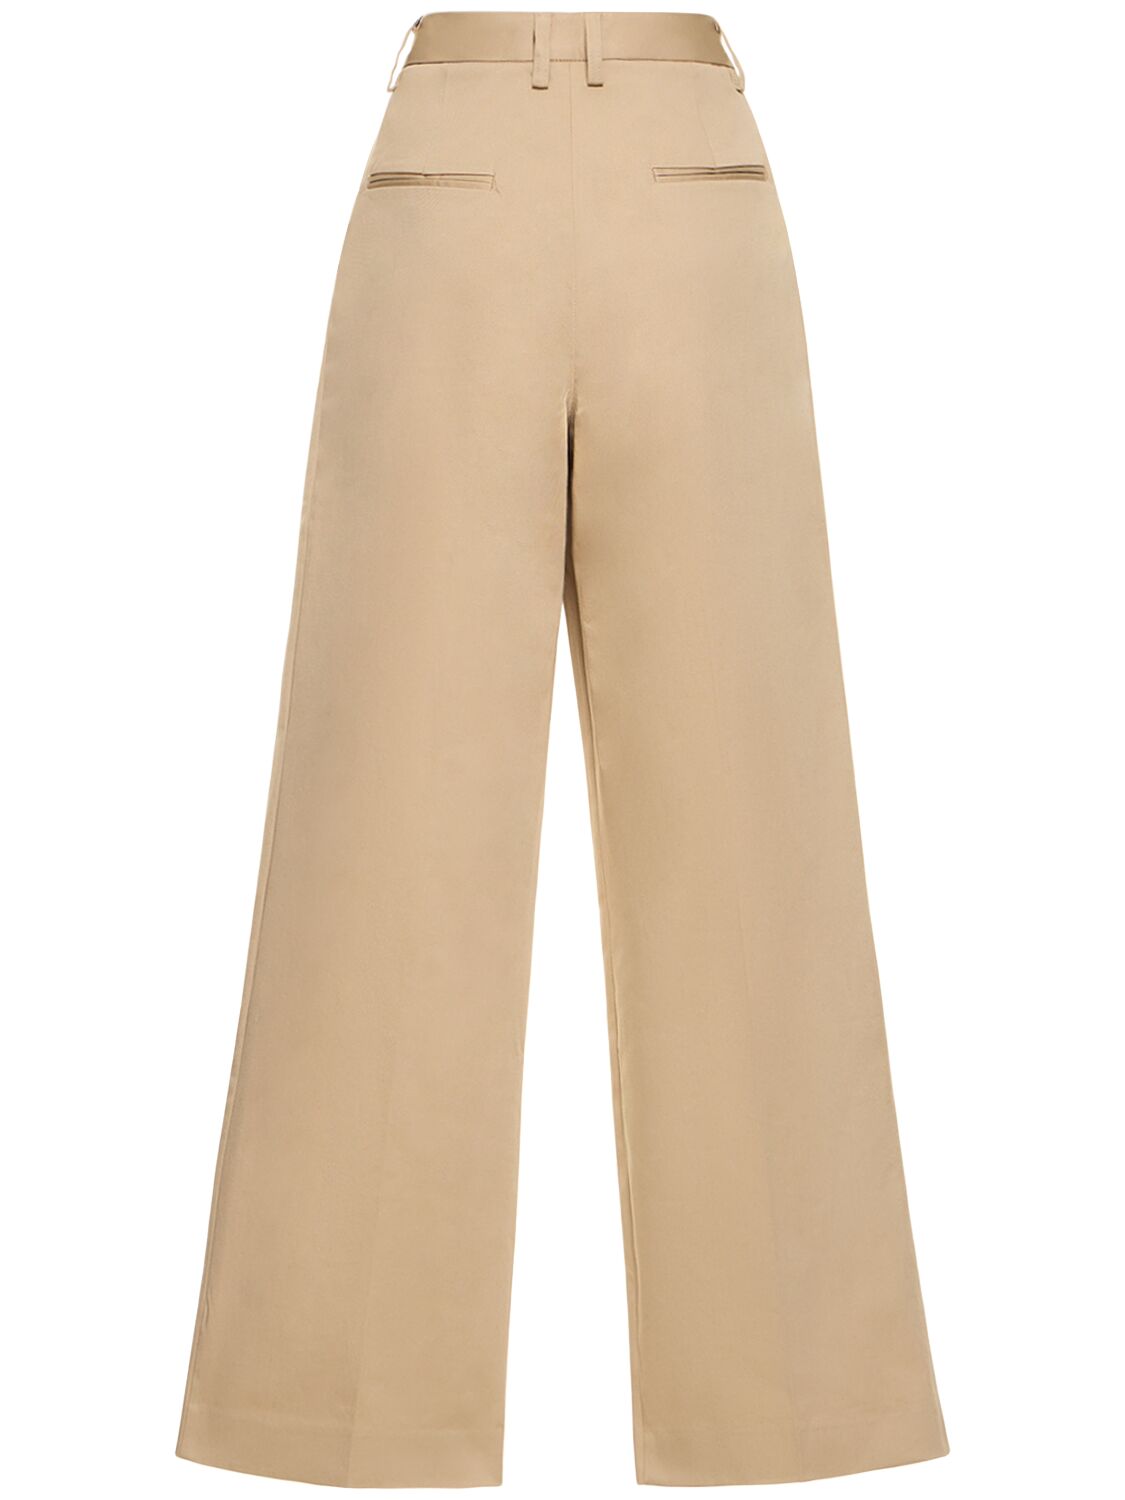 Shop Matteau Summer Cotton Twill Chino Pants In Sand